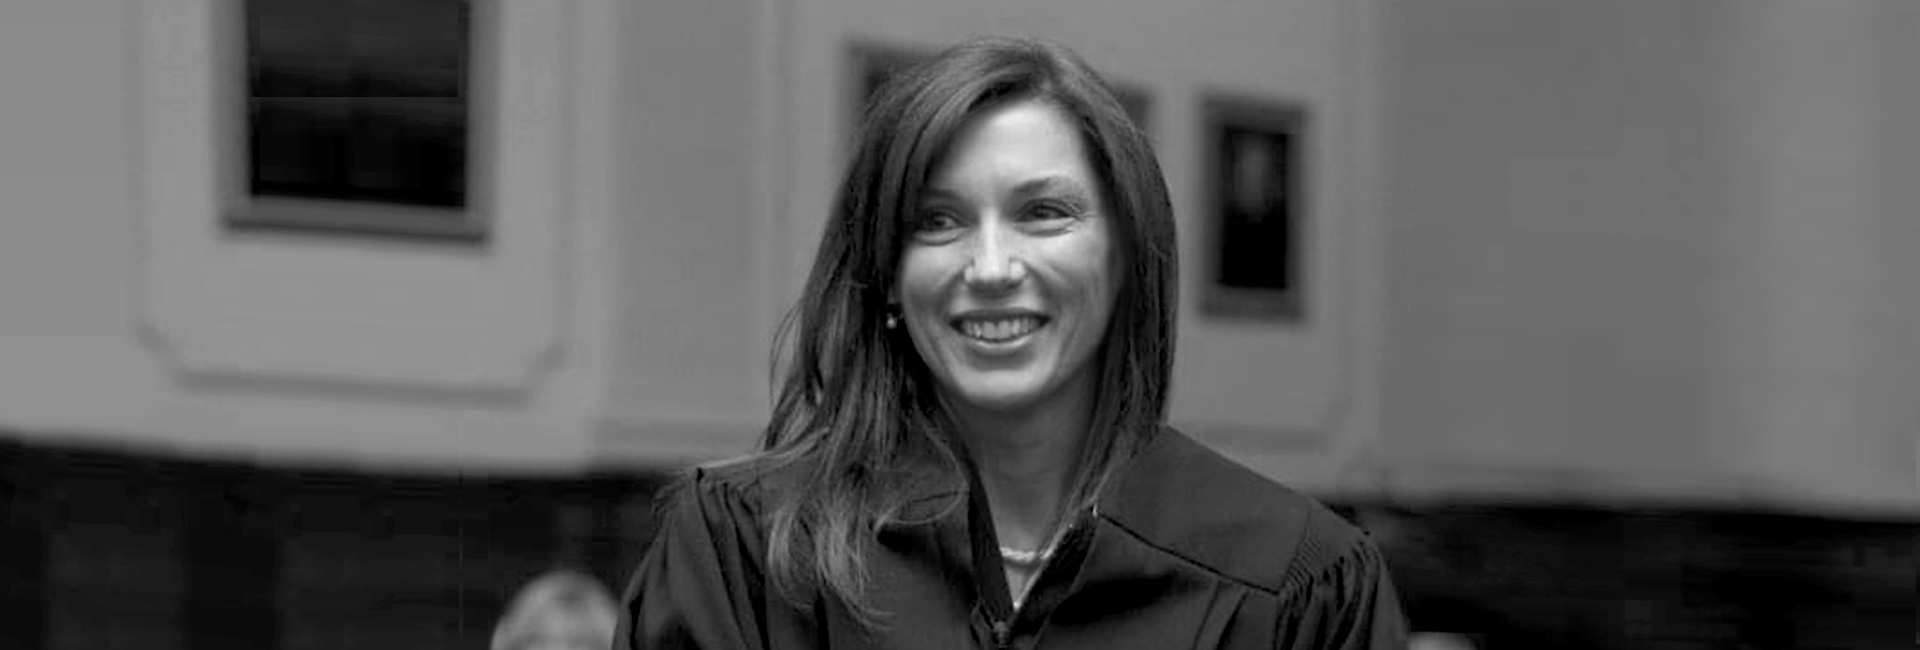 Banner image of Cathleen Rebar in black and white. Cathleen is wearing her judge robes.